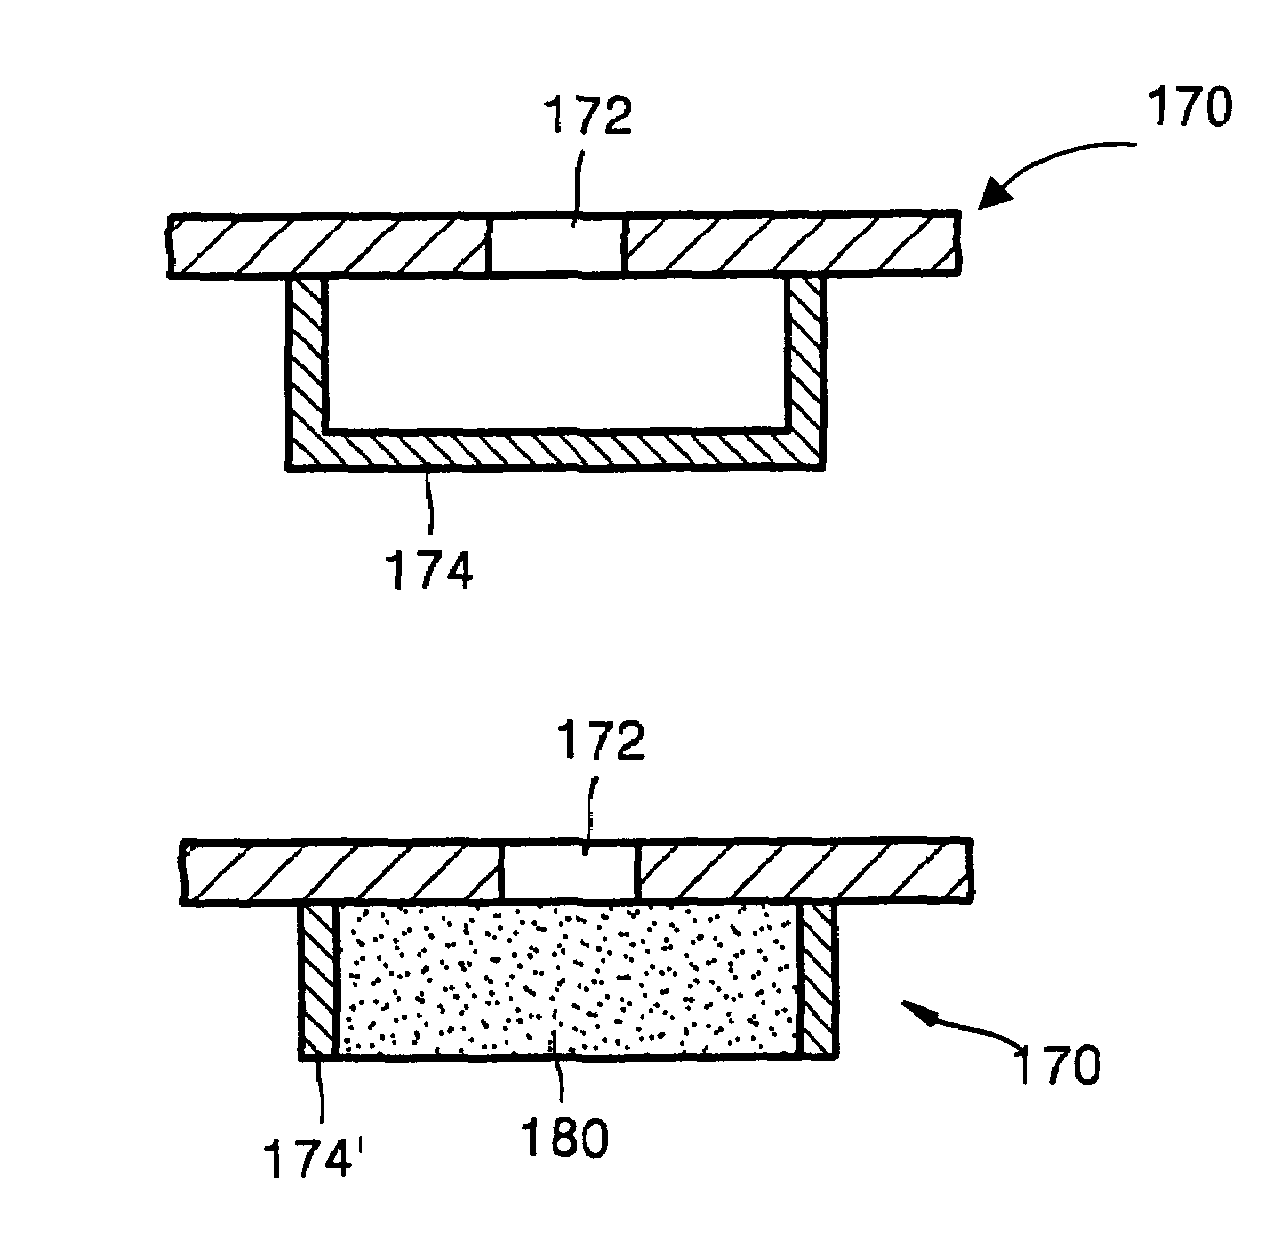 Disk tray for disk drive adopting resonator and disk drive having the same